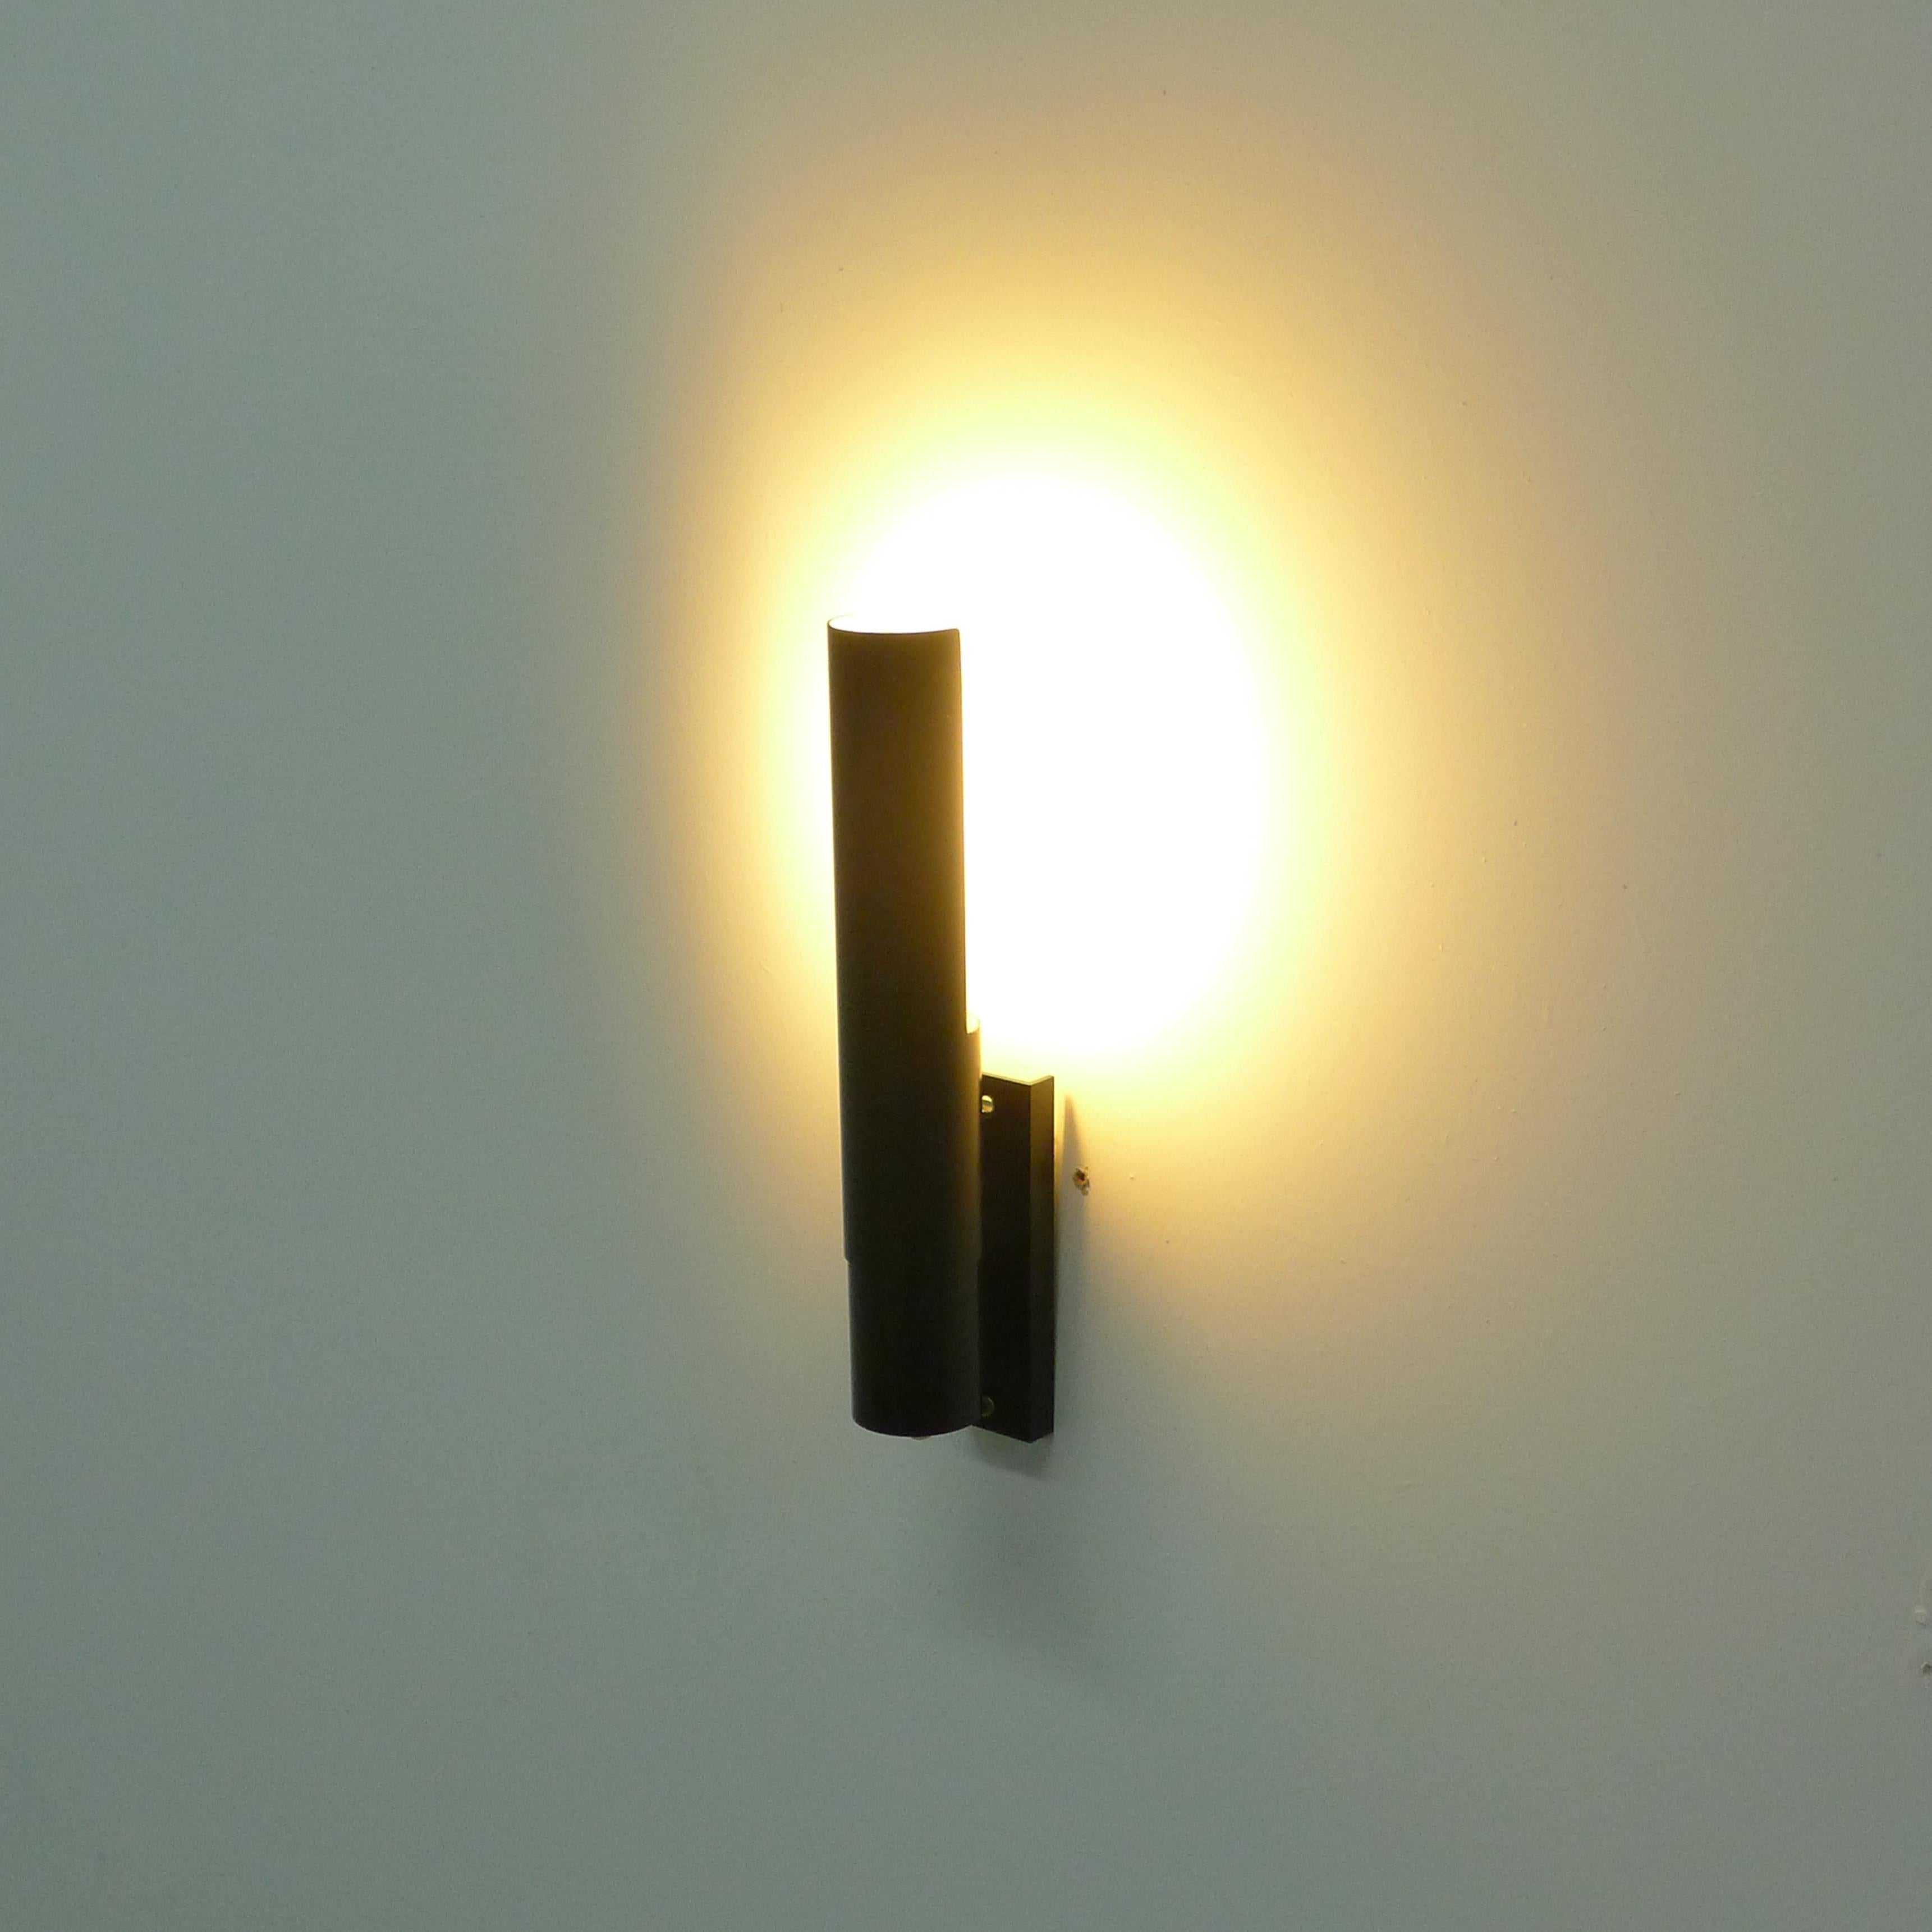 Gino Sarfatti, Wall Sconce, model 211, designed 1955 and manufactured by Arteluce in the 1950s.

In black lacquered aluminium with reflector that rotates on its own guard axis, so that light be can directed where required.

Arteluce label to the